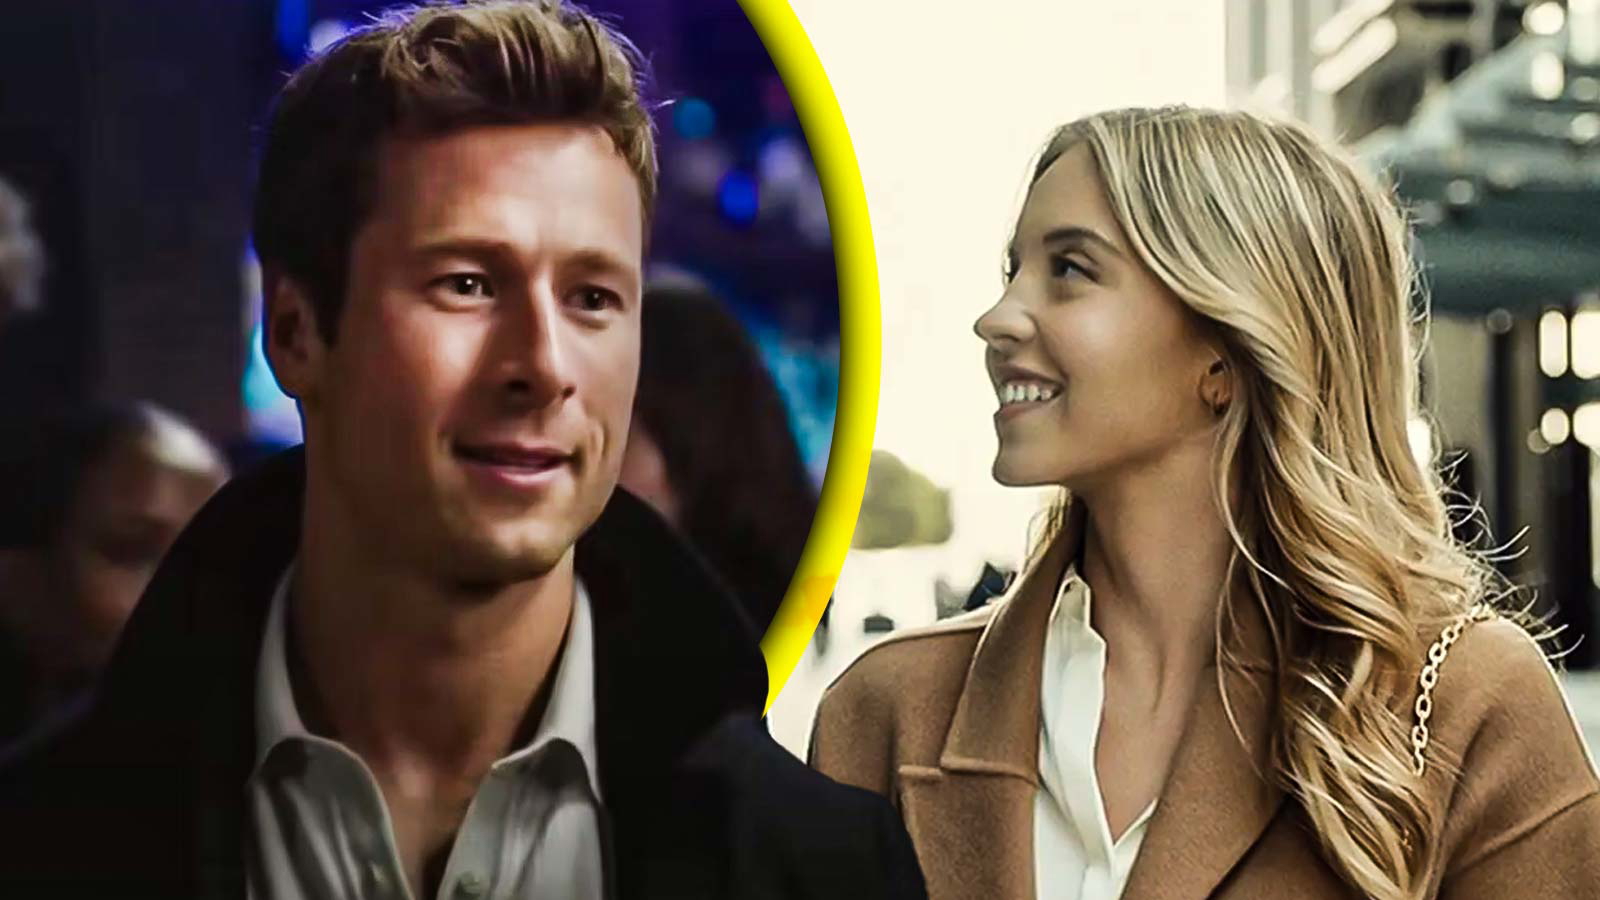 Sydney Sweeney and Glen Powell’s Fake Dating Rumors For ‘Anyone But You’ Have Finally Helped the Film’s Most Deserving Artist Reach a Huge Milestone